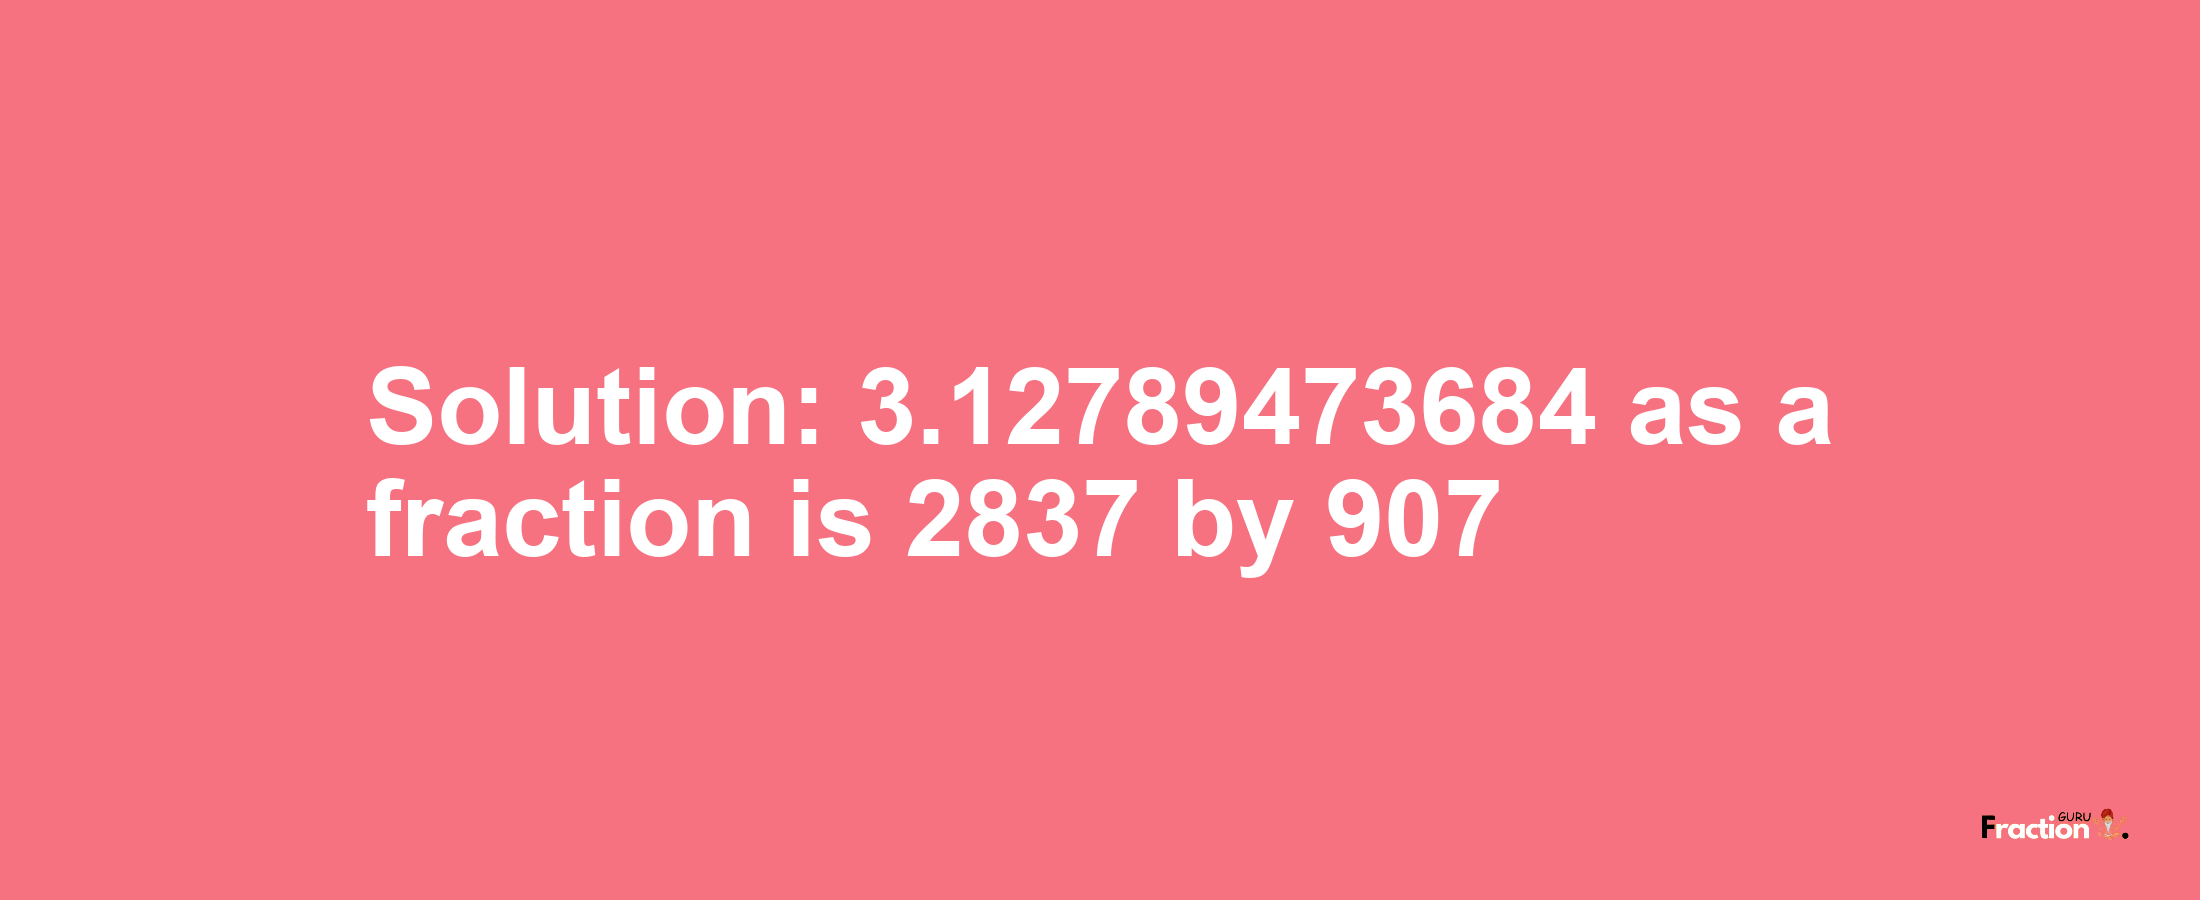 Solution:3.12789473684 as a fraction is 2837/907